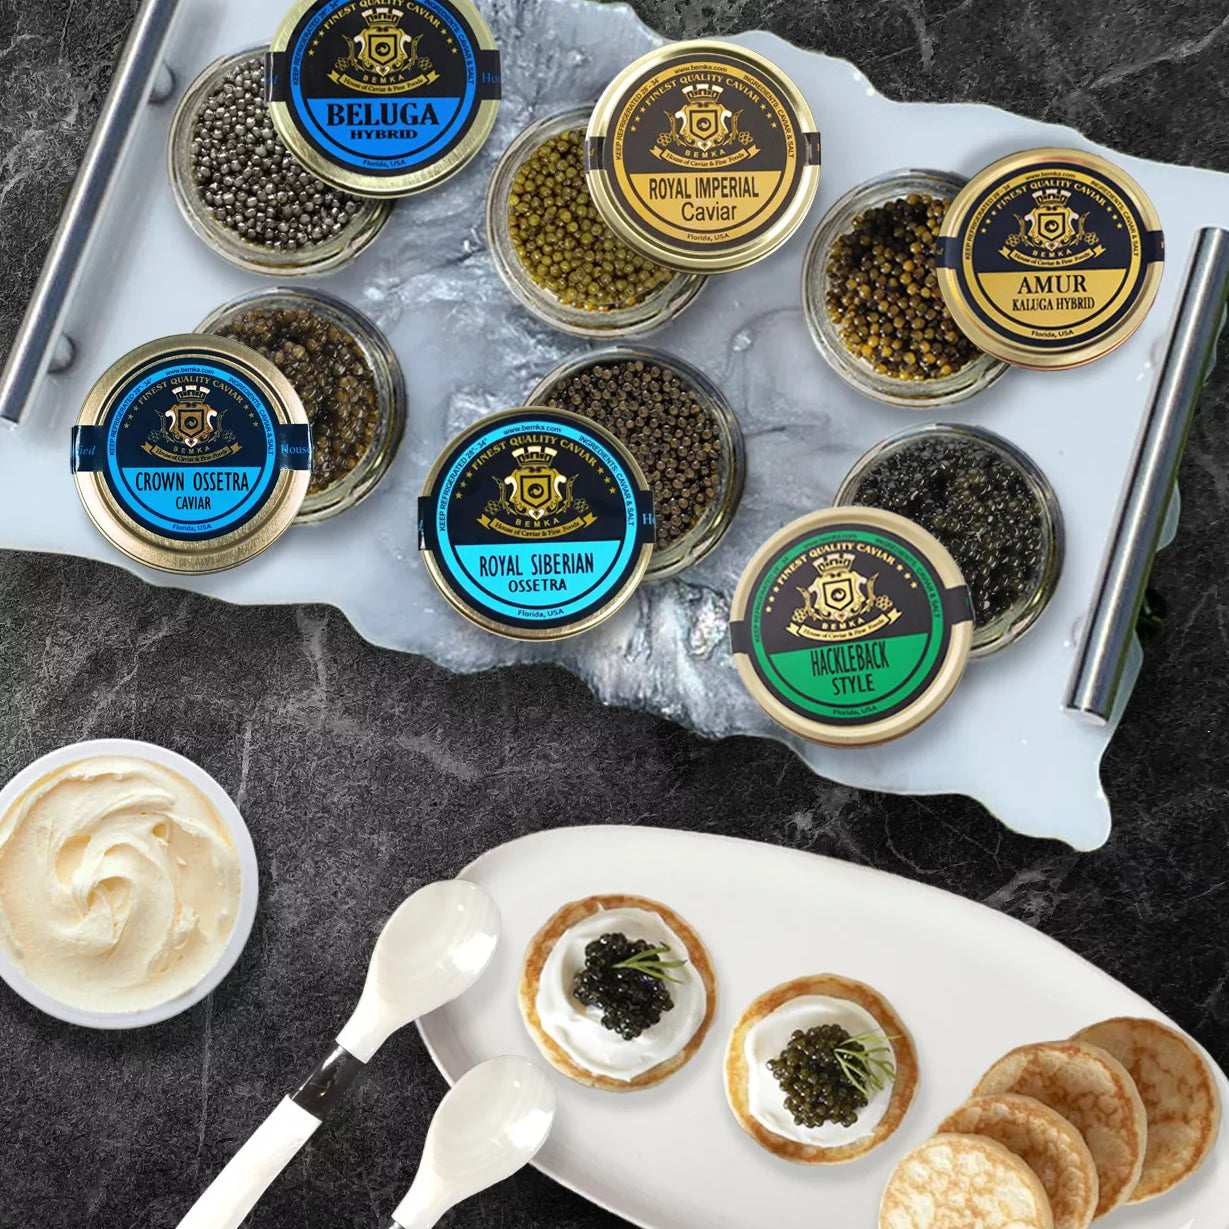 Caviar at The Party! Allowing Guests to Indulge in the Luxury.